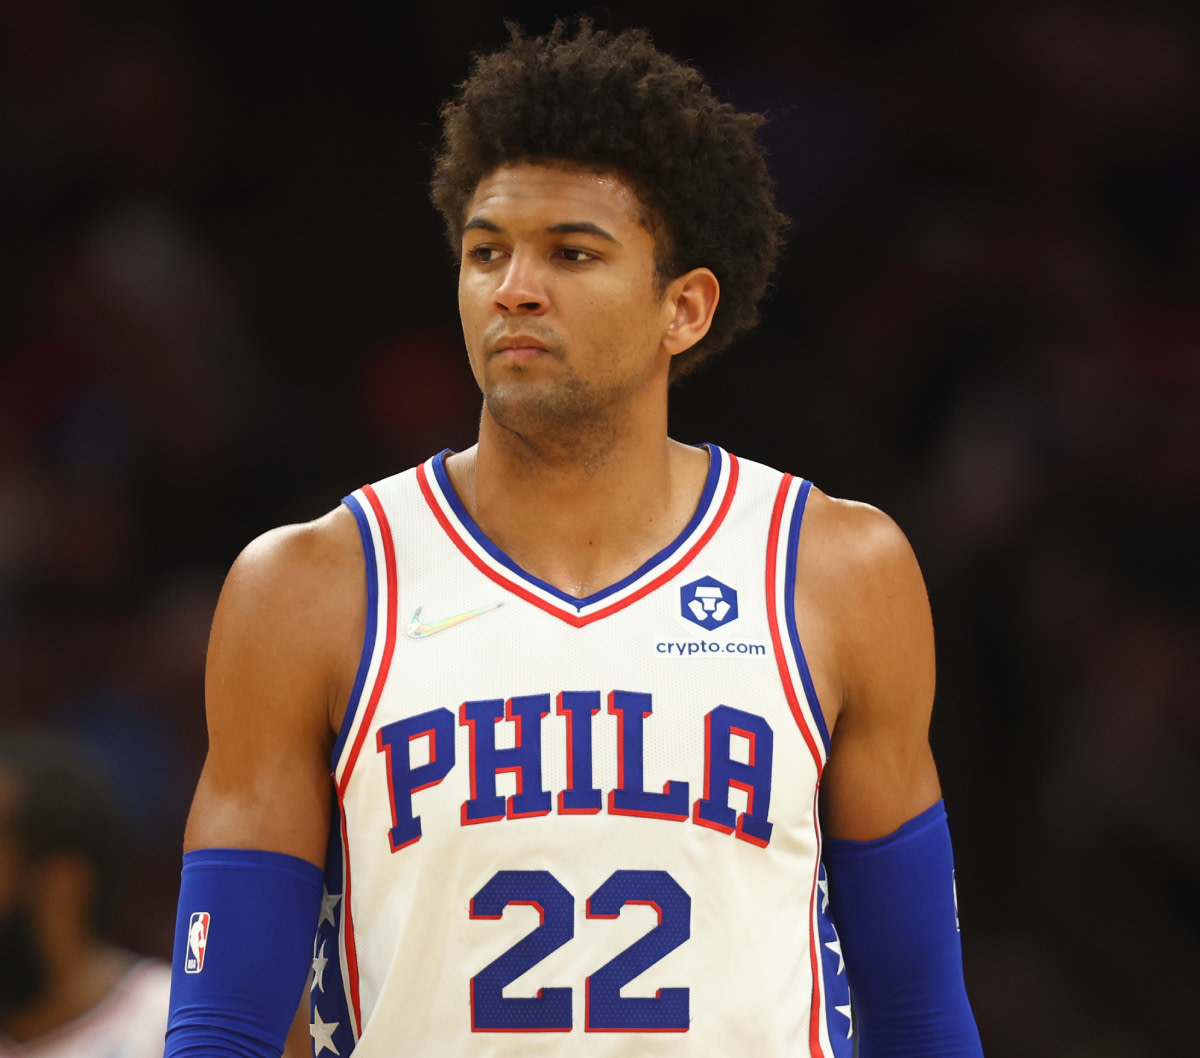 Matisse Thybulle Opens Up On Not Being Fully Vaccinated As He Is Set To Miss 2 Games In Series Against Toronto: "This Was A Decision I Made A Long Time Ago... I Didn't See Any Benefits Outweighing What I Could Seek From Alternative Medicine."